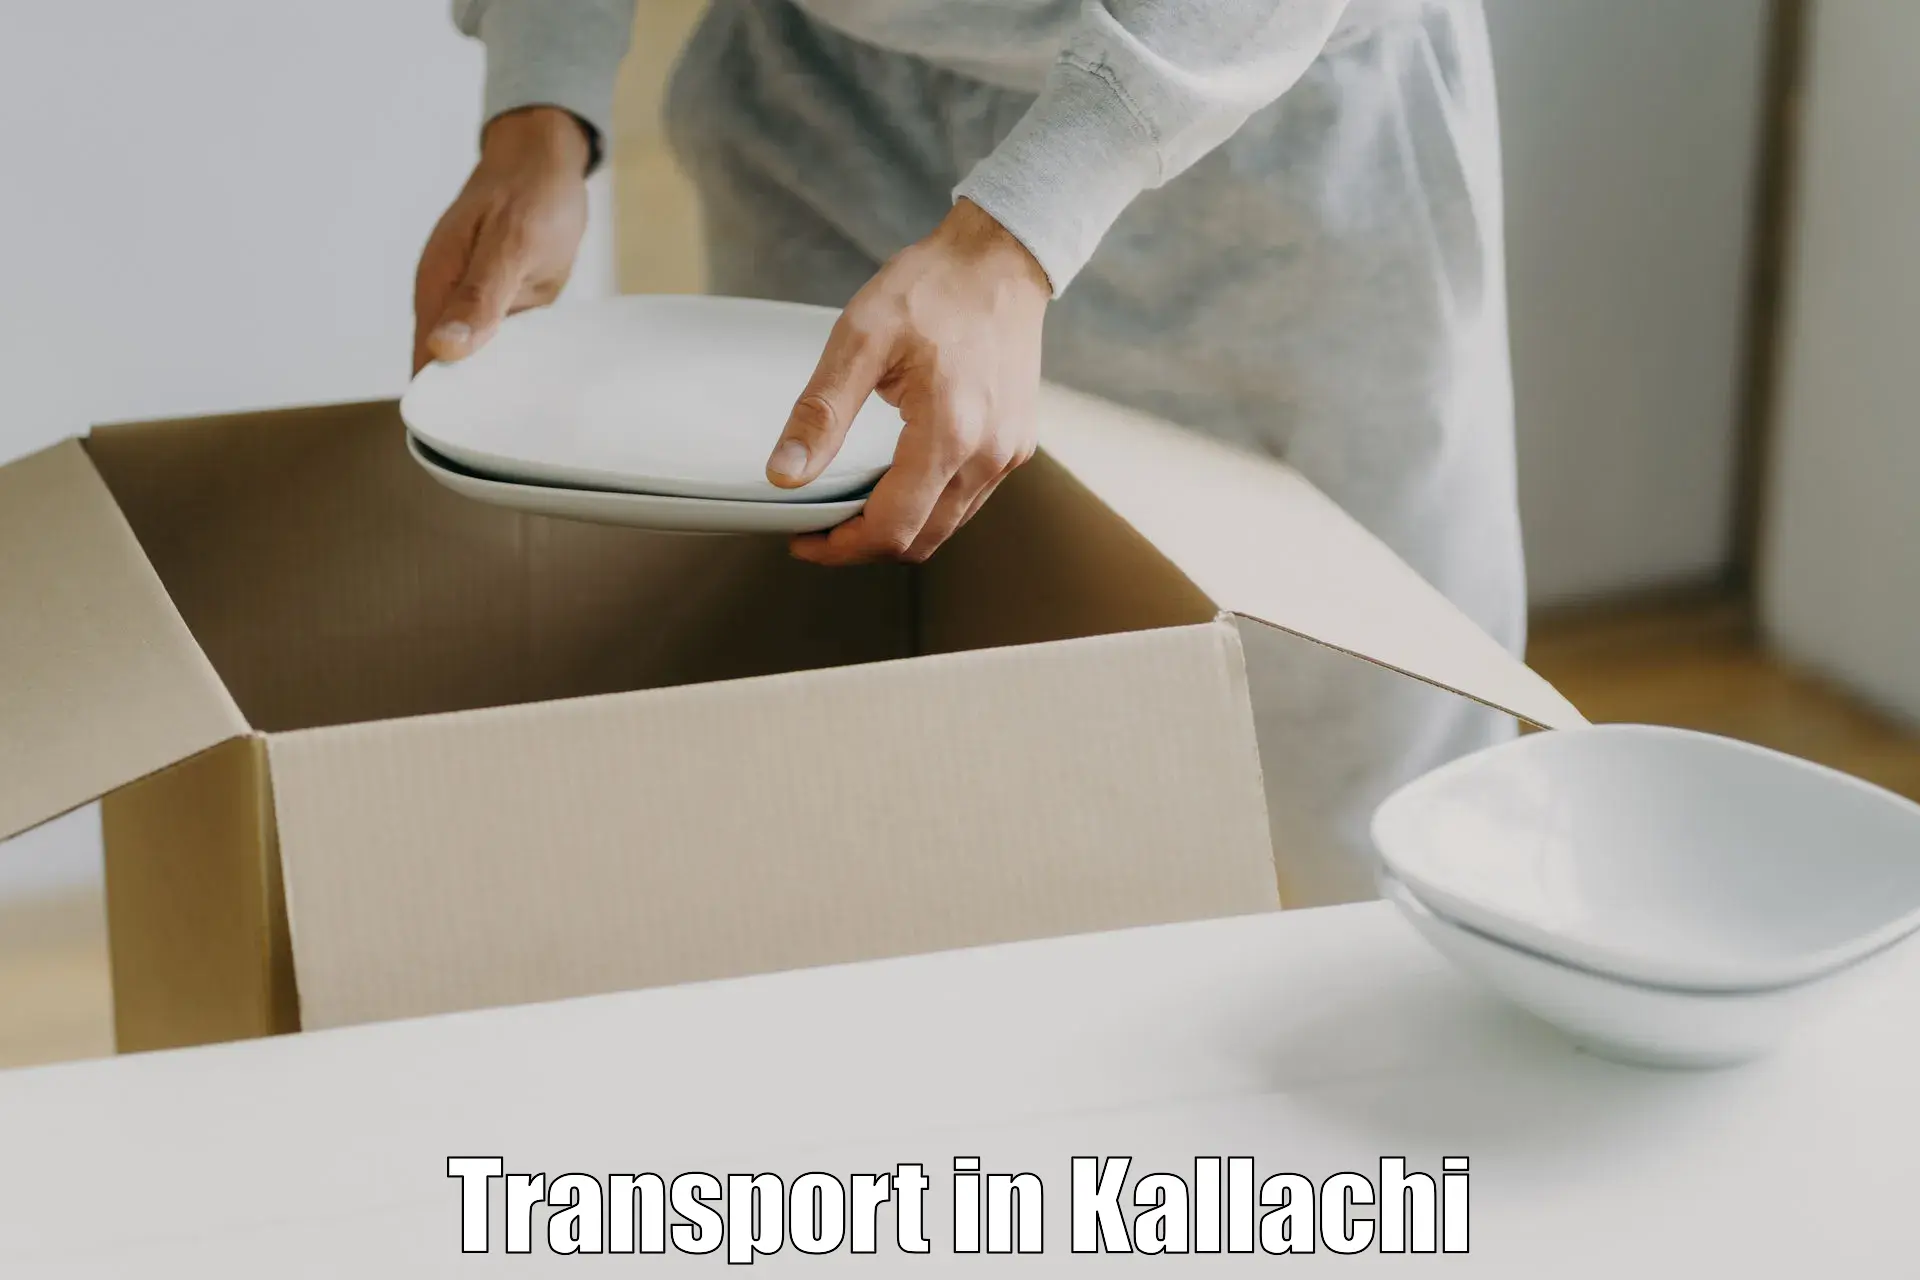 Luggage transport services in Kallachi